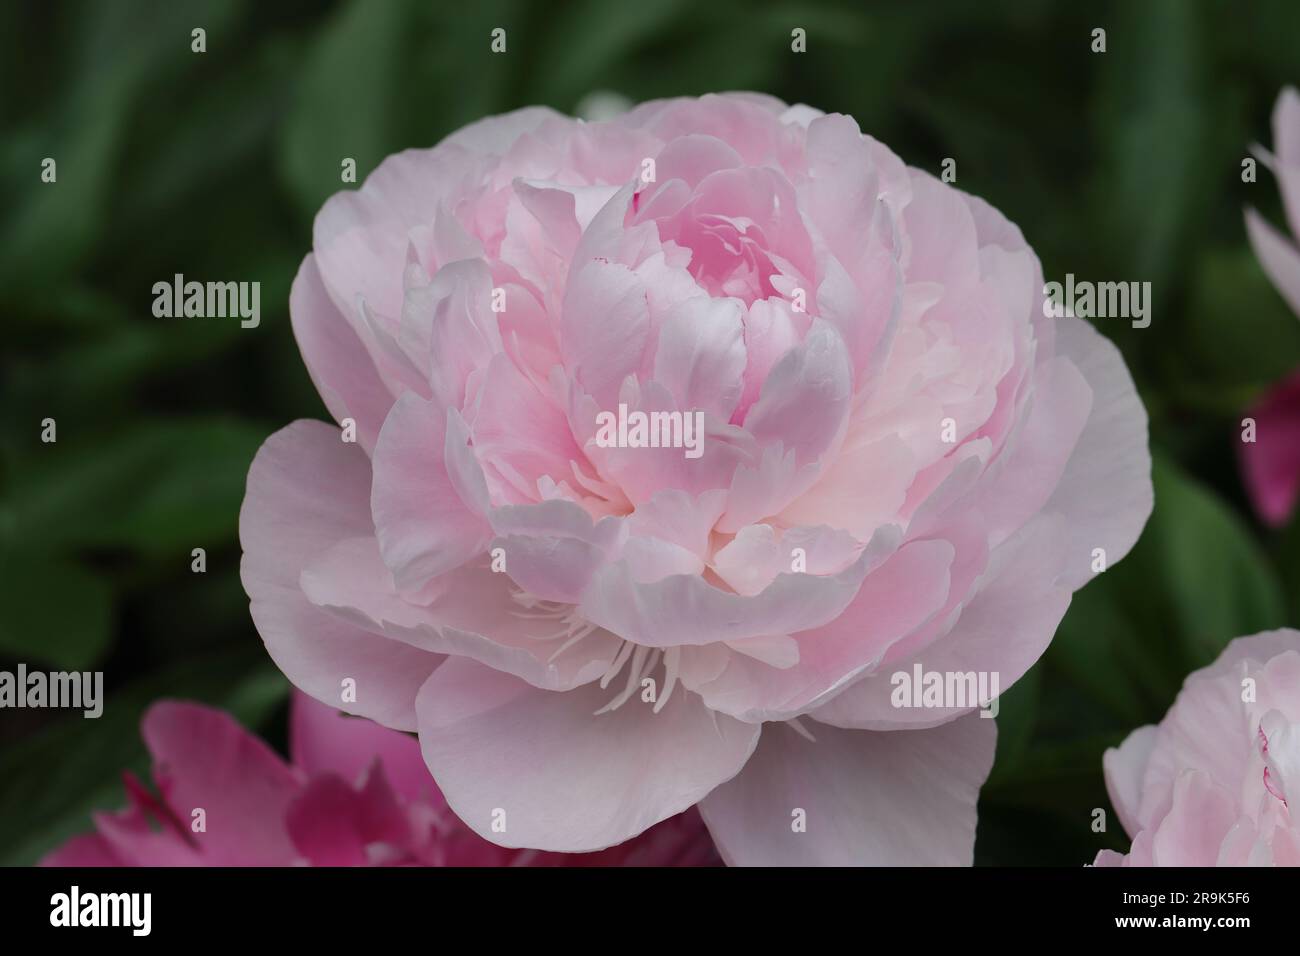 Close-up of a beautiful soft pink Paeonia lactiflora against a blurry background Stock Photo